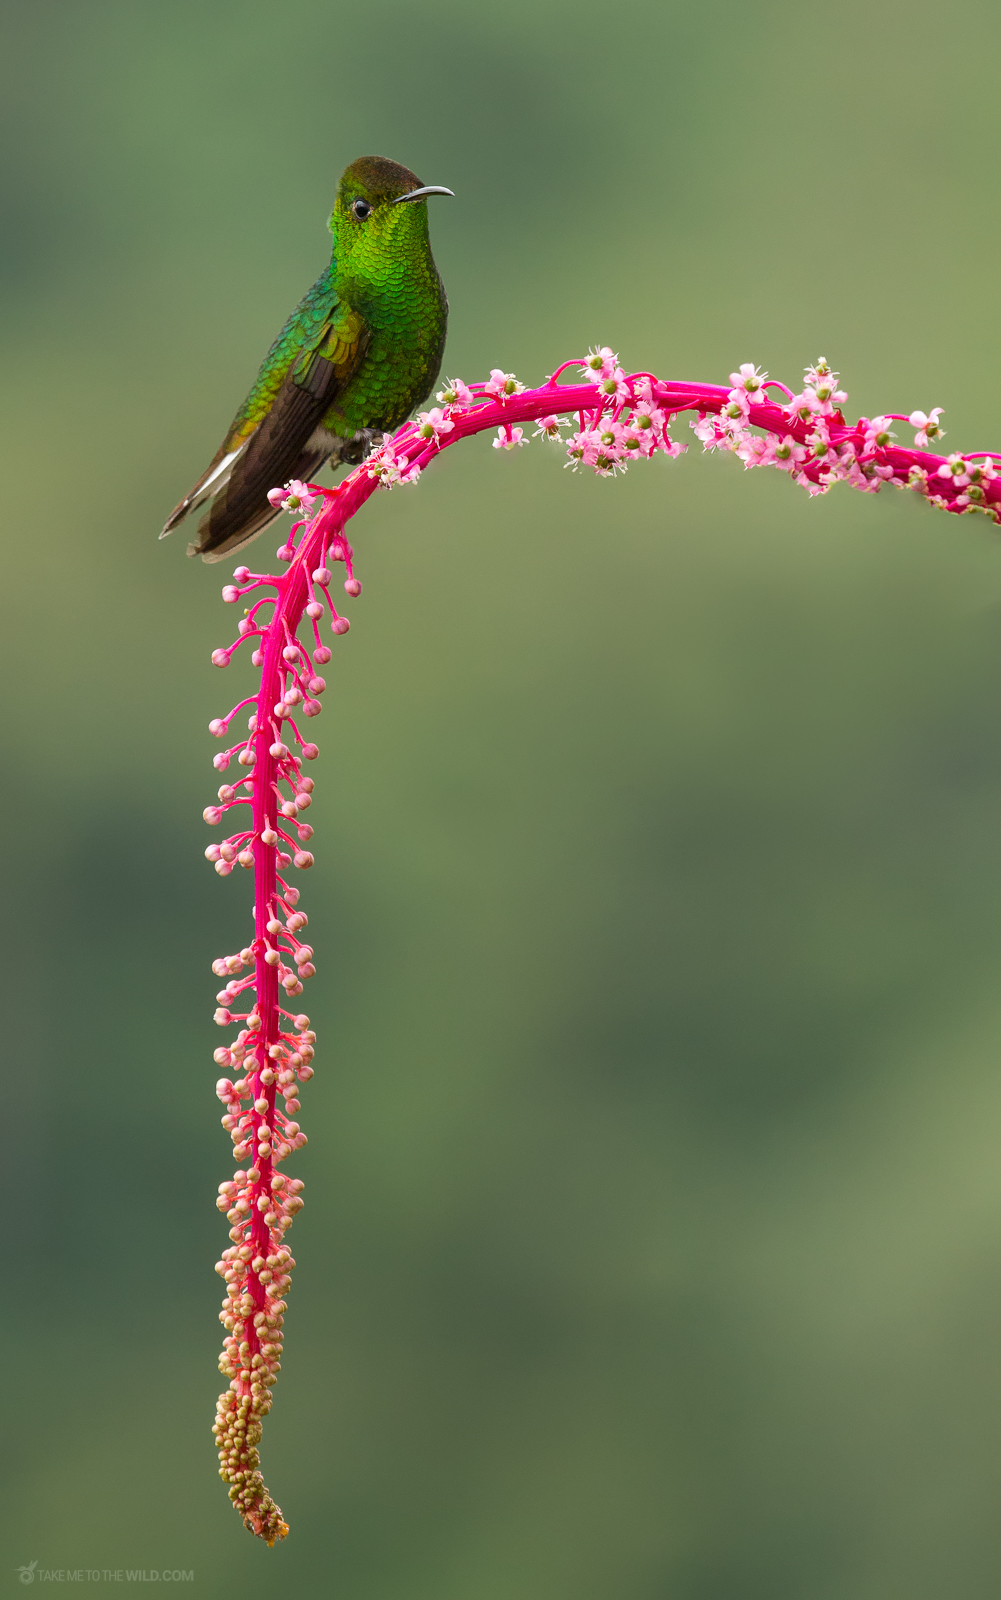 Coppery-headed Emerald, endemic from Costa Rica. Perched on flowers at Cinchona, Costa Rica.